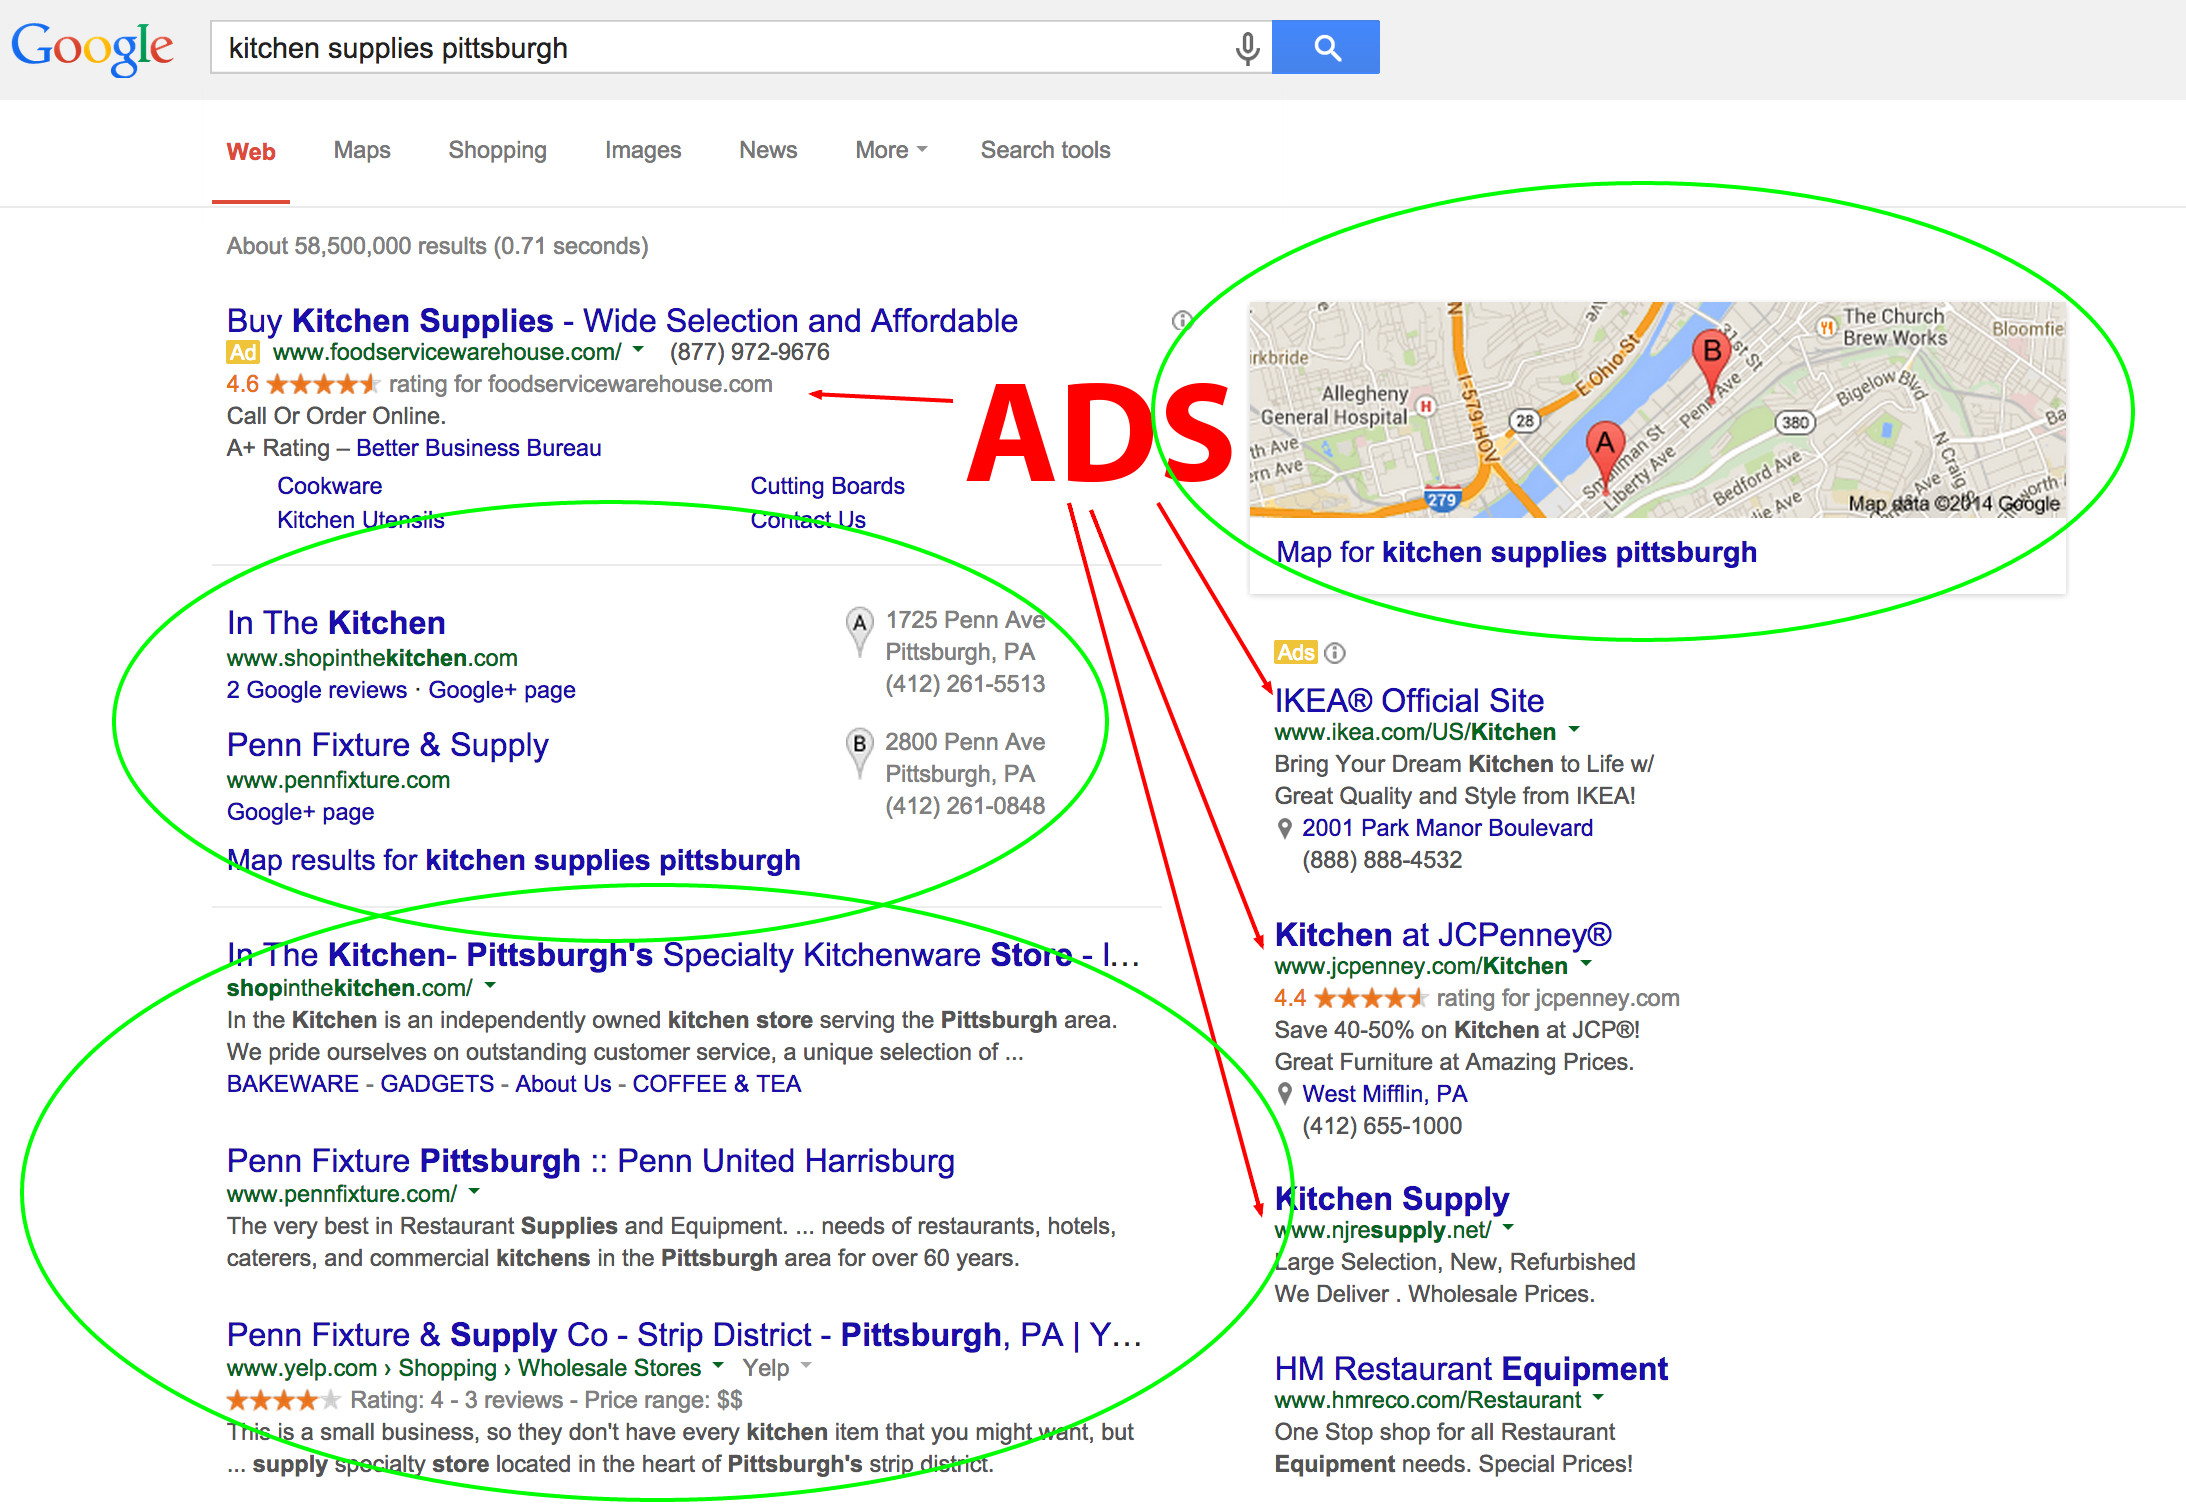 Showing how local search narrows down the results greatly